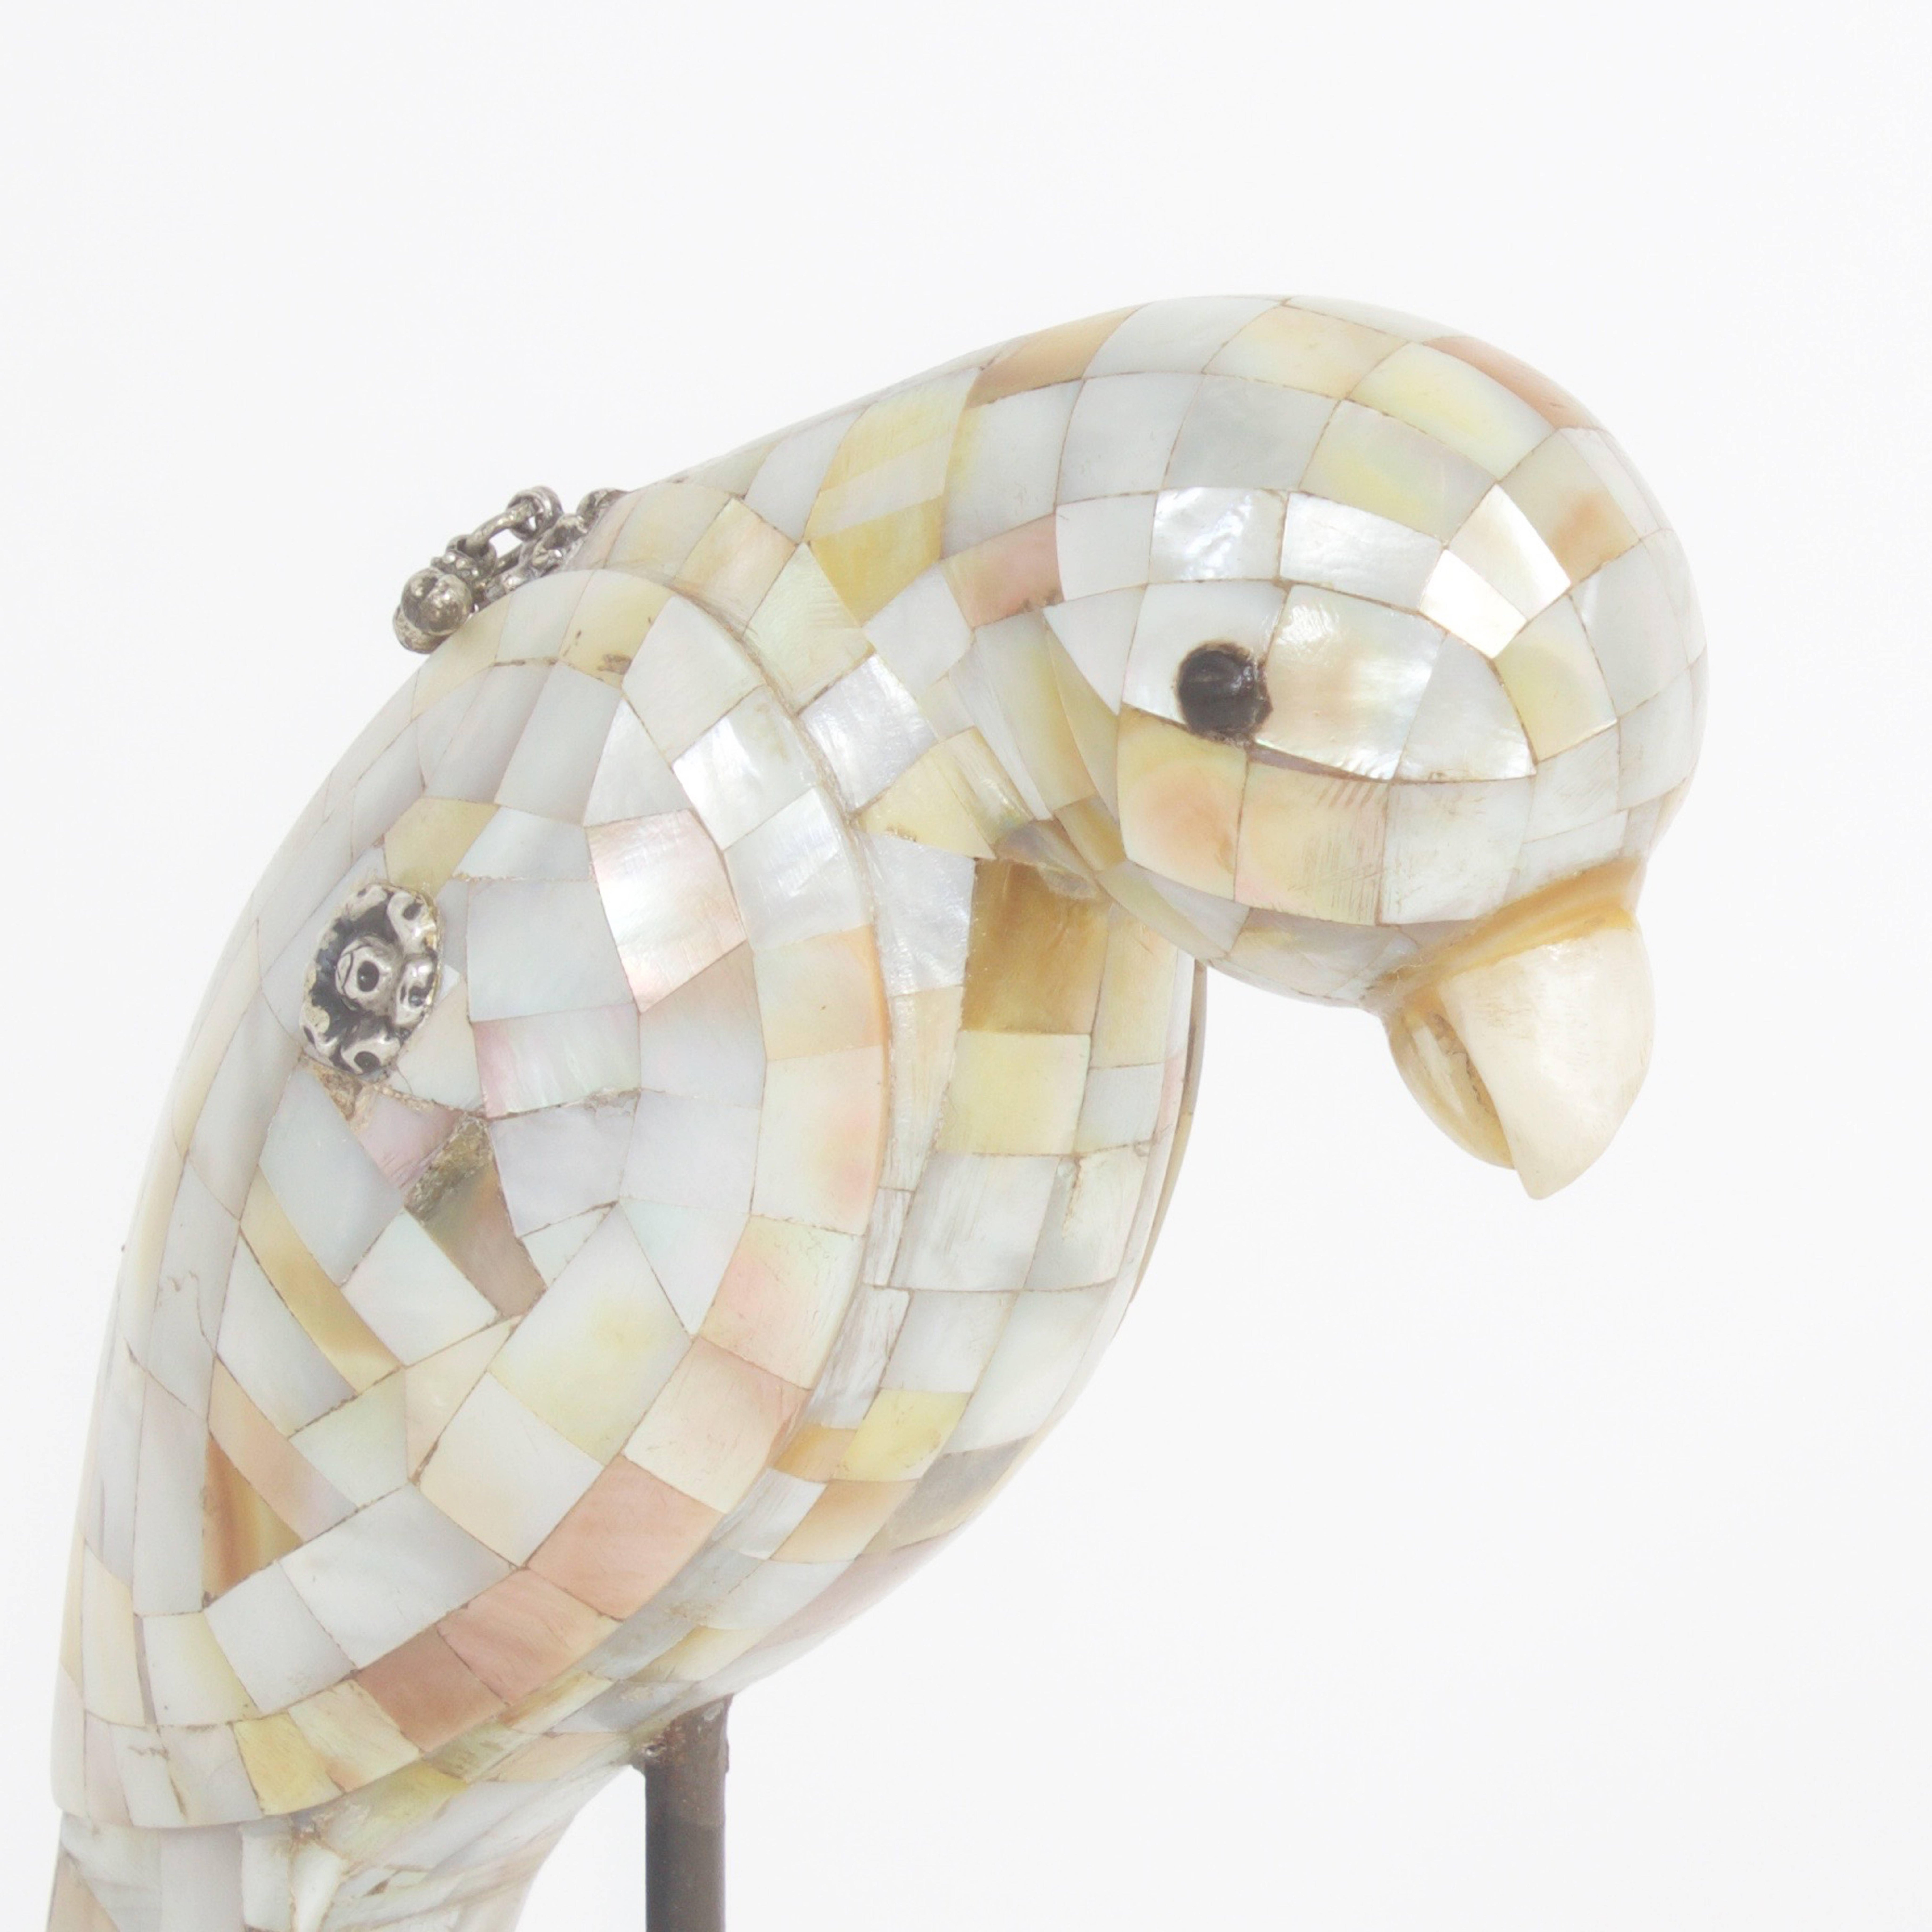 Intriguing Mid century parrot sculpture decorated in a mother of pearl mosaic and mounted on an ebonized base. Featuring three silver, jewelry type medallions in a floral motif.